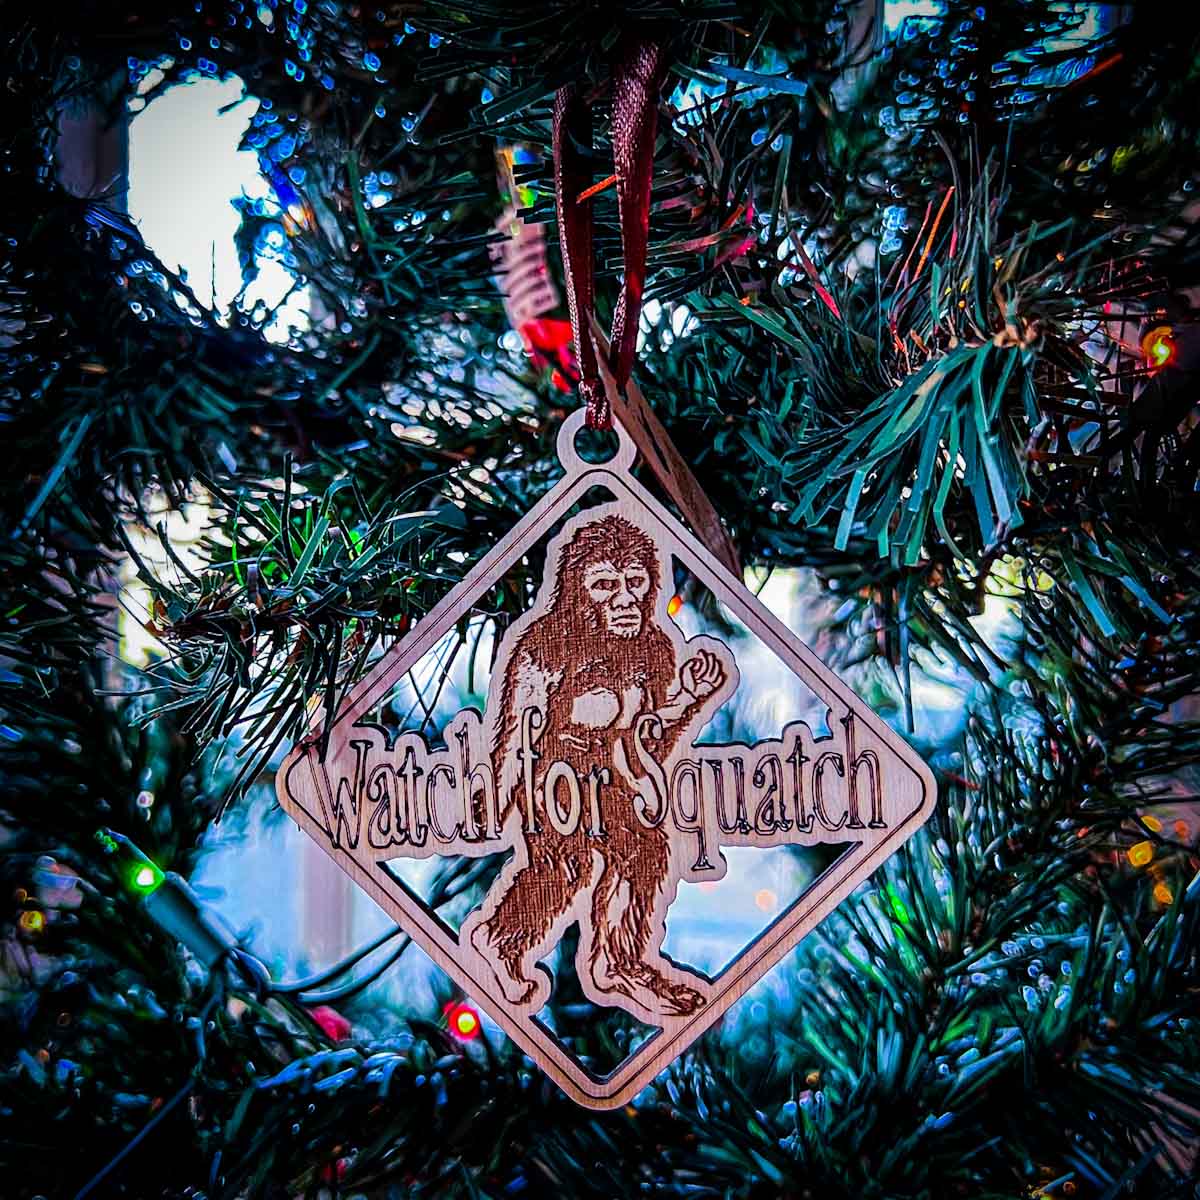 Watch for Squatch Ornament